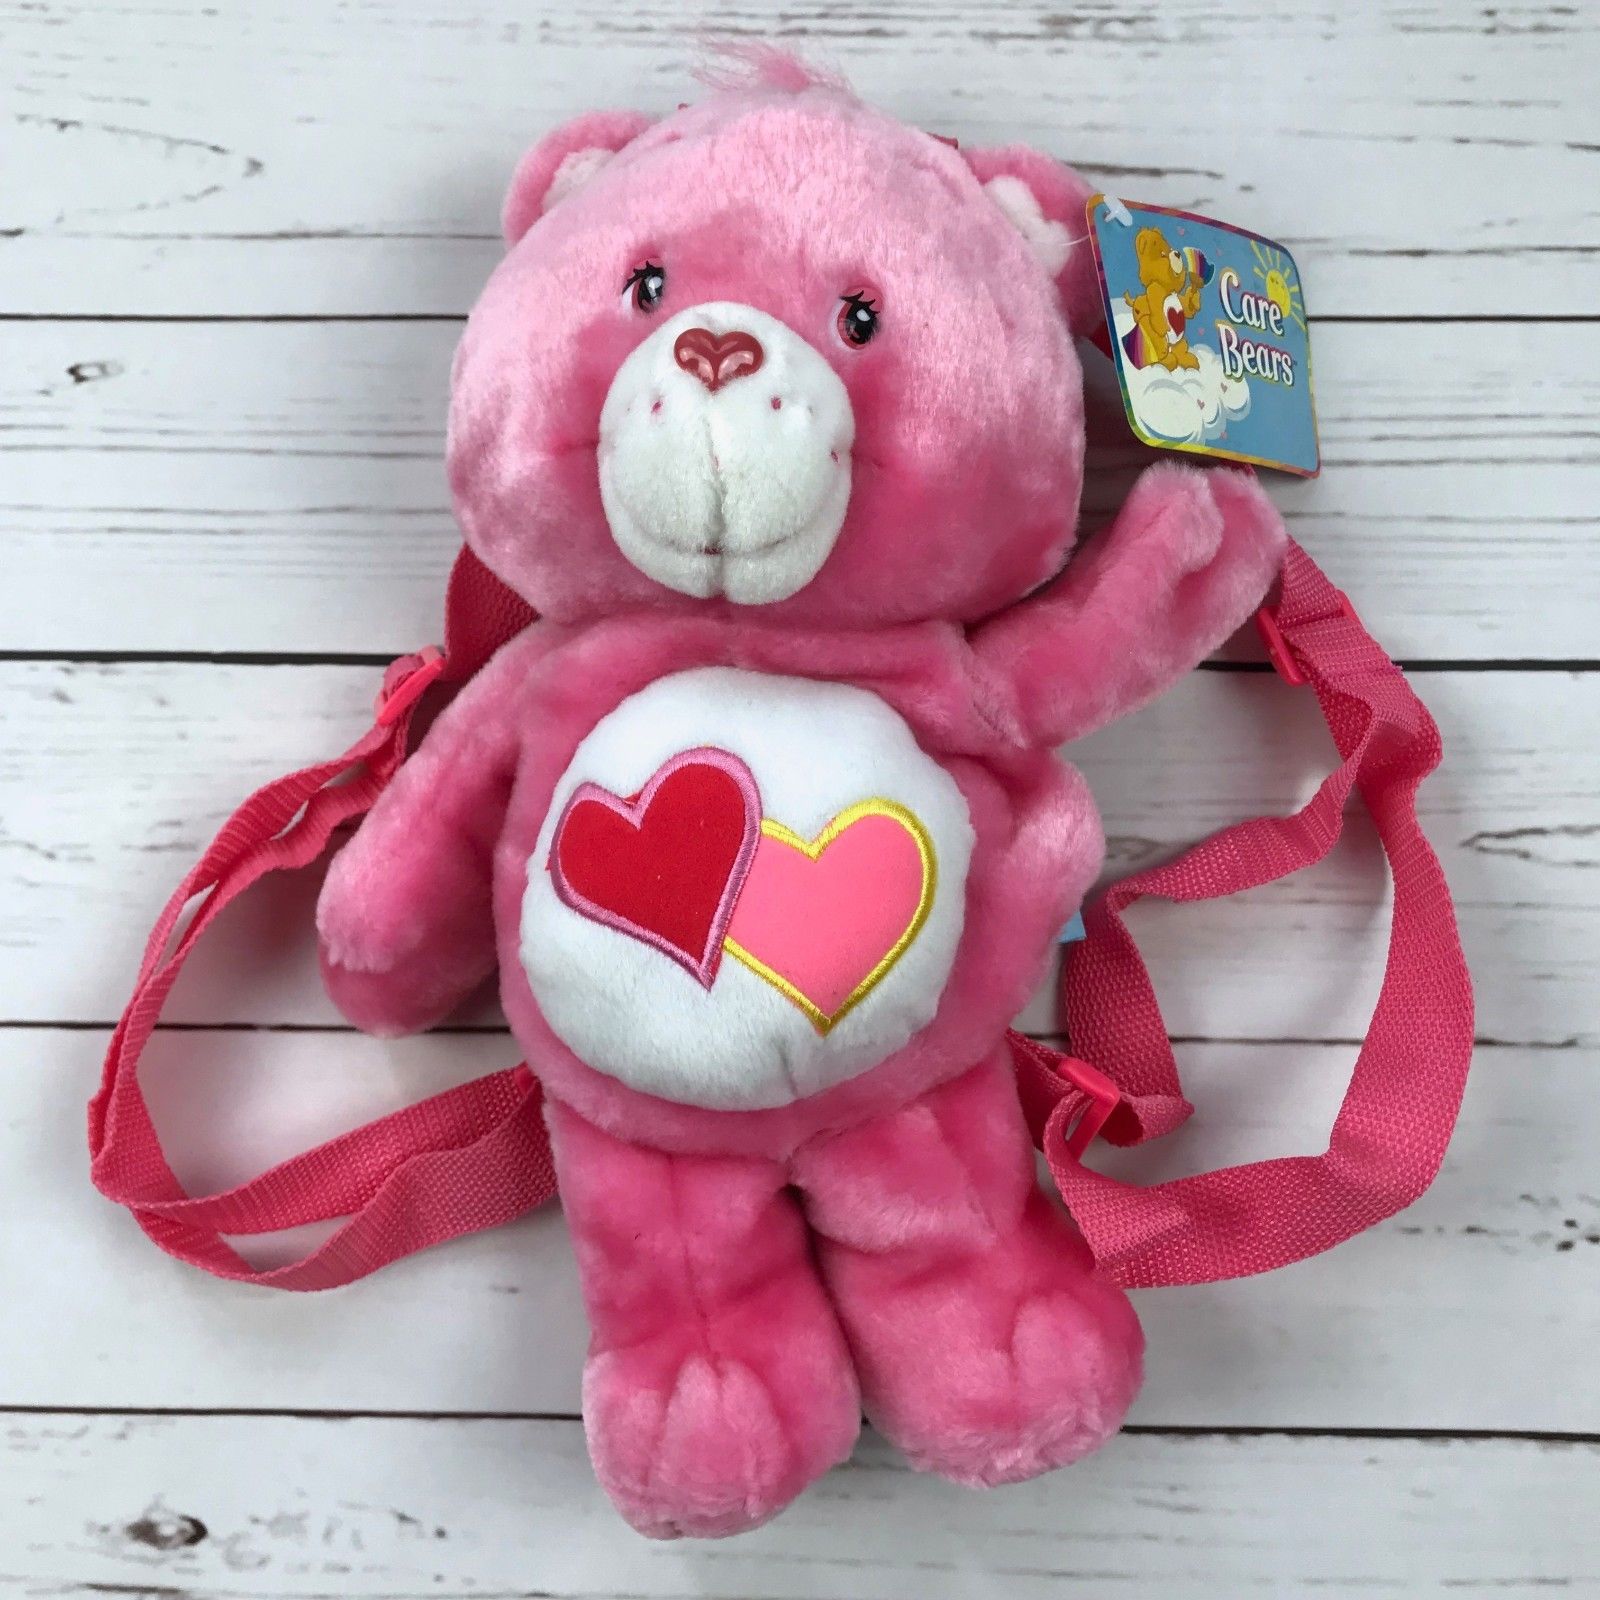 Care Bears 2003 Love a lot Bear Pink Plush Backpack with Tags